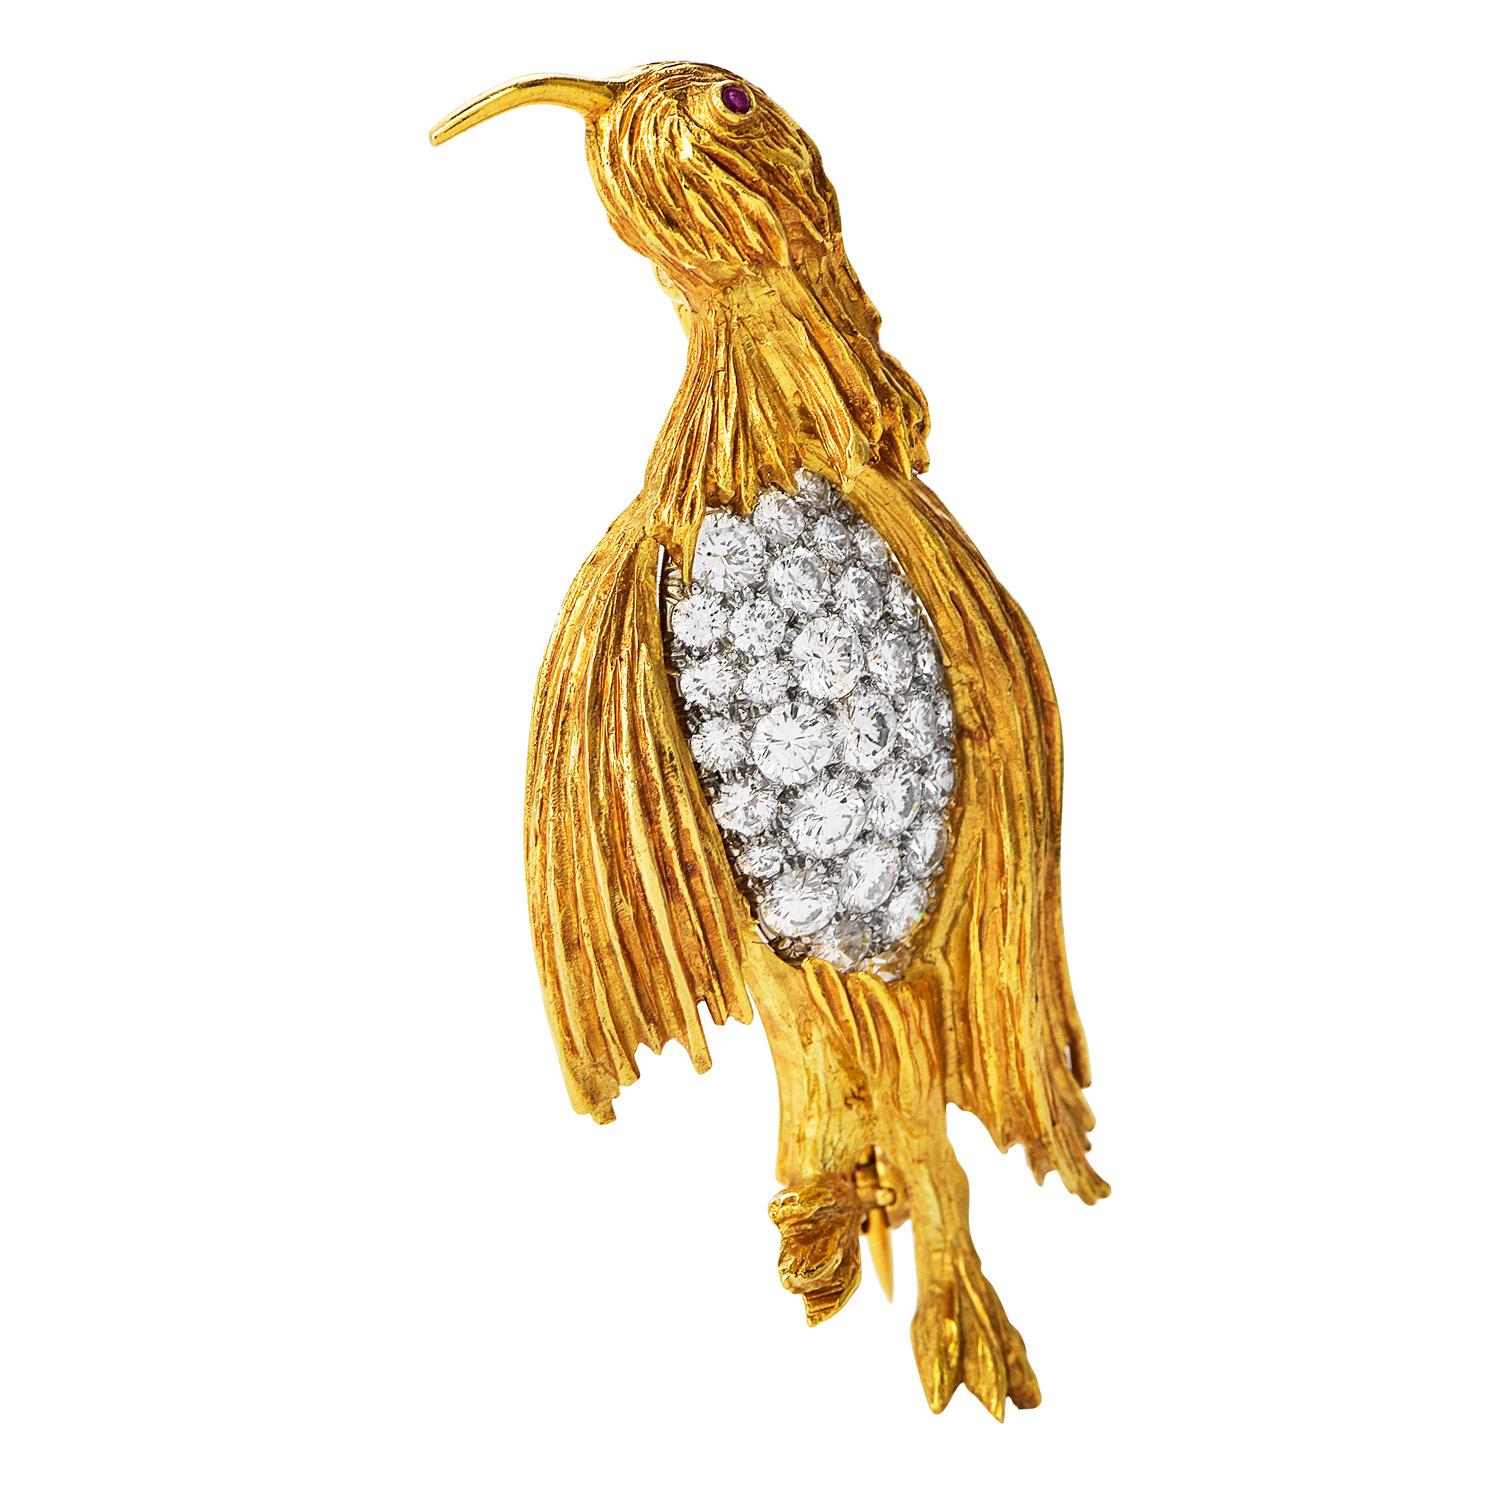 Vintage Diamond 18K Gold platinum Penguin Pin Brooch

Crafted in solid 18K yellow gold and solid platinum, featuring (29) Genuine Diamonds round-cut, pave-set, weighing approximately 1.90 carats (F-G color and VS clarity) Set in platinum.

0ne